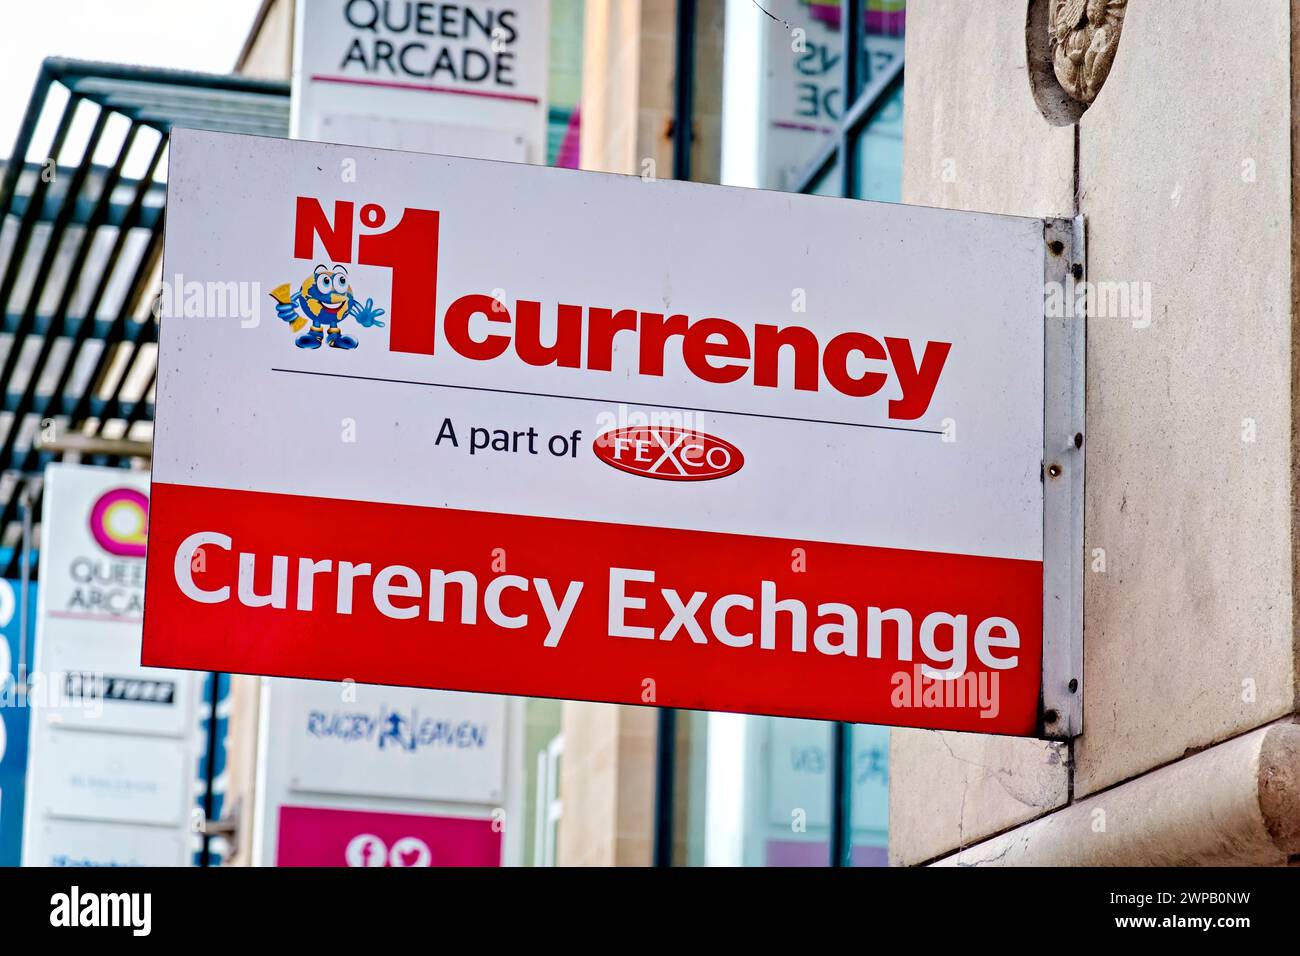 Cardiff, Wales, UK - December 6 2023: The No1 Currency Exchange Store in Queens Arcade, Queen Street, Cardiff, Wales, United Kingdom Stock Photo